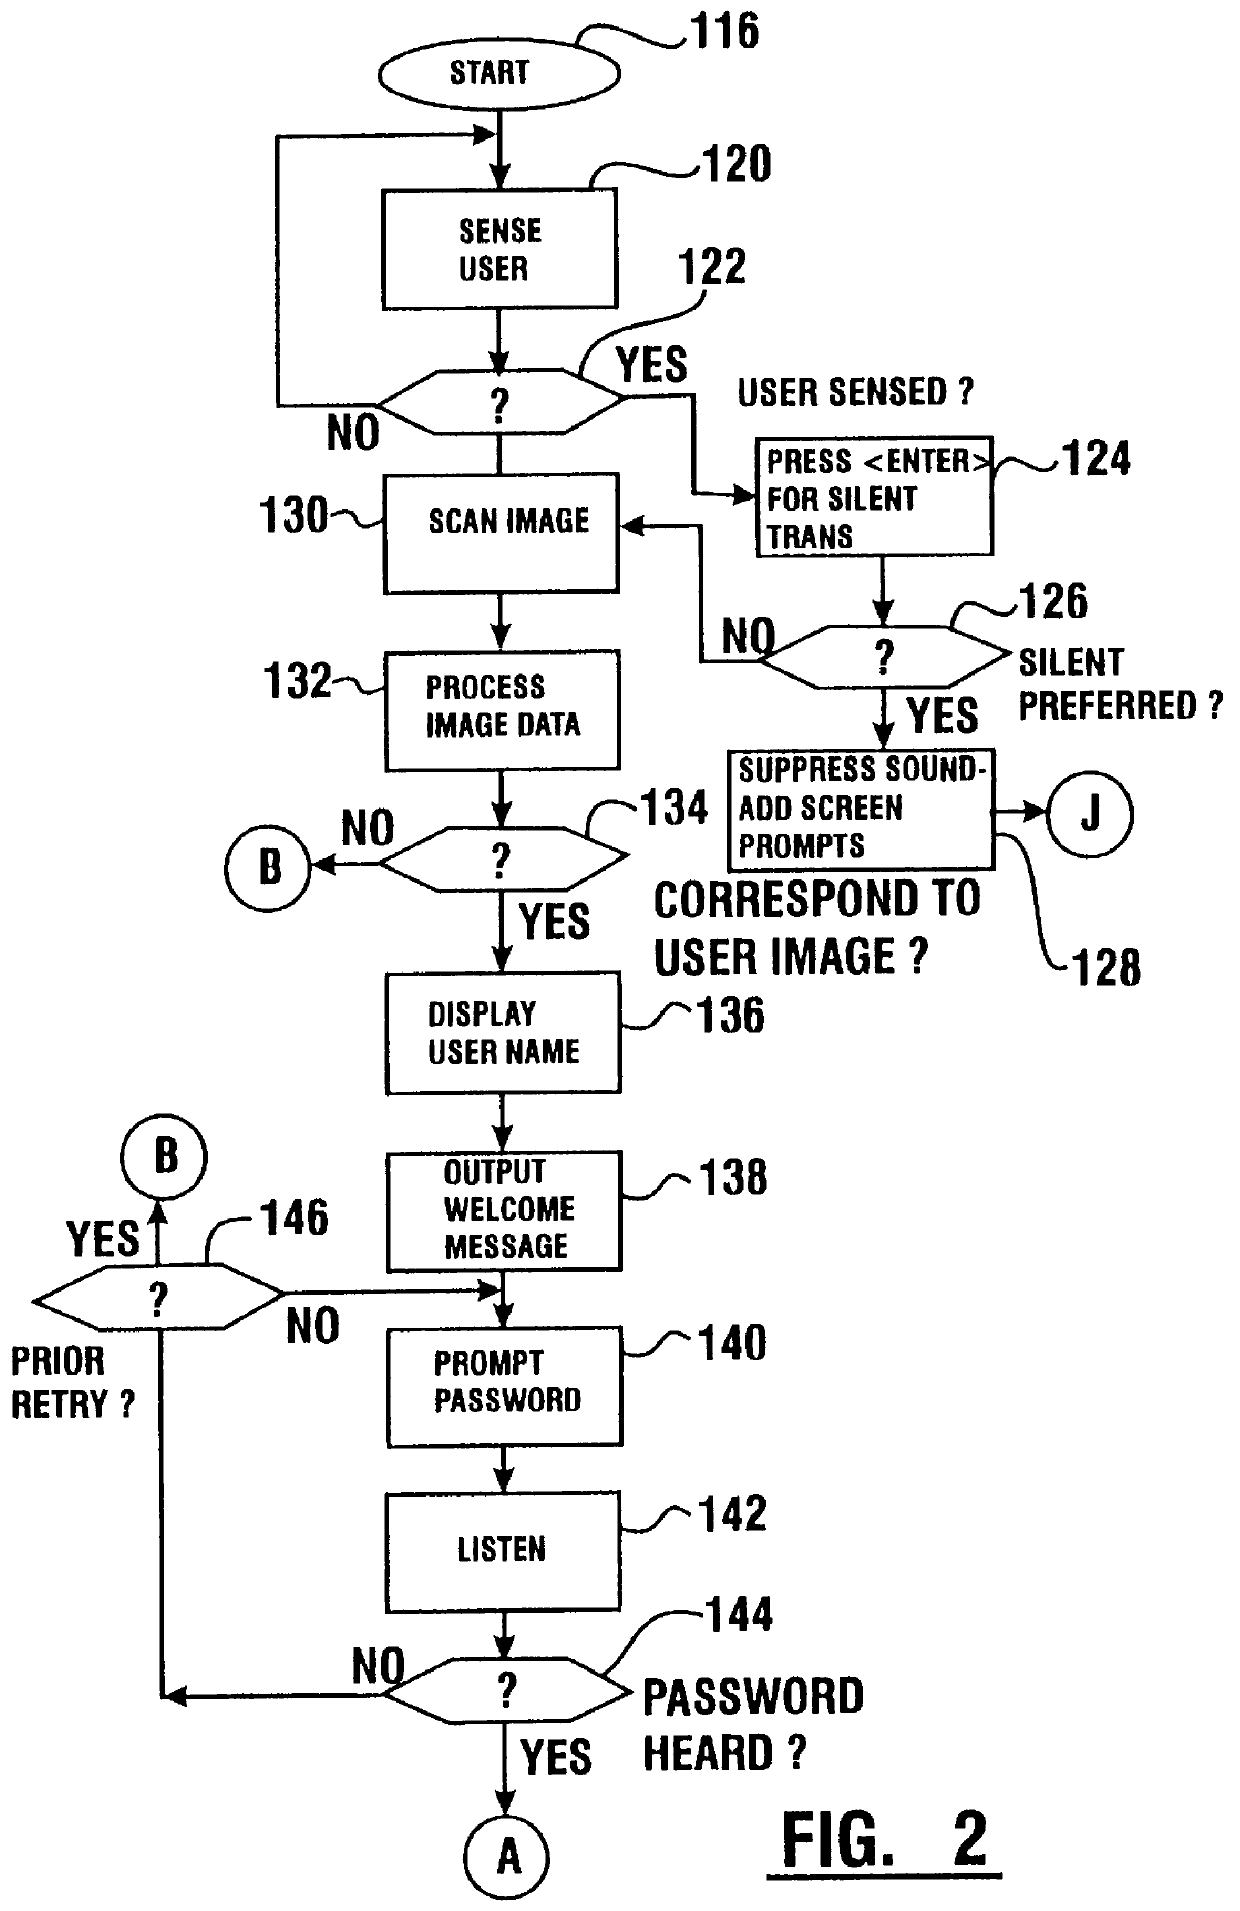 Transaction apparatus and method that identifies an authorized user by appearance and voice